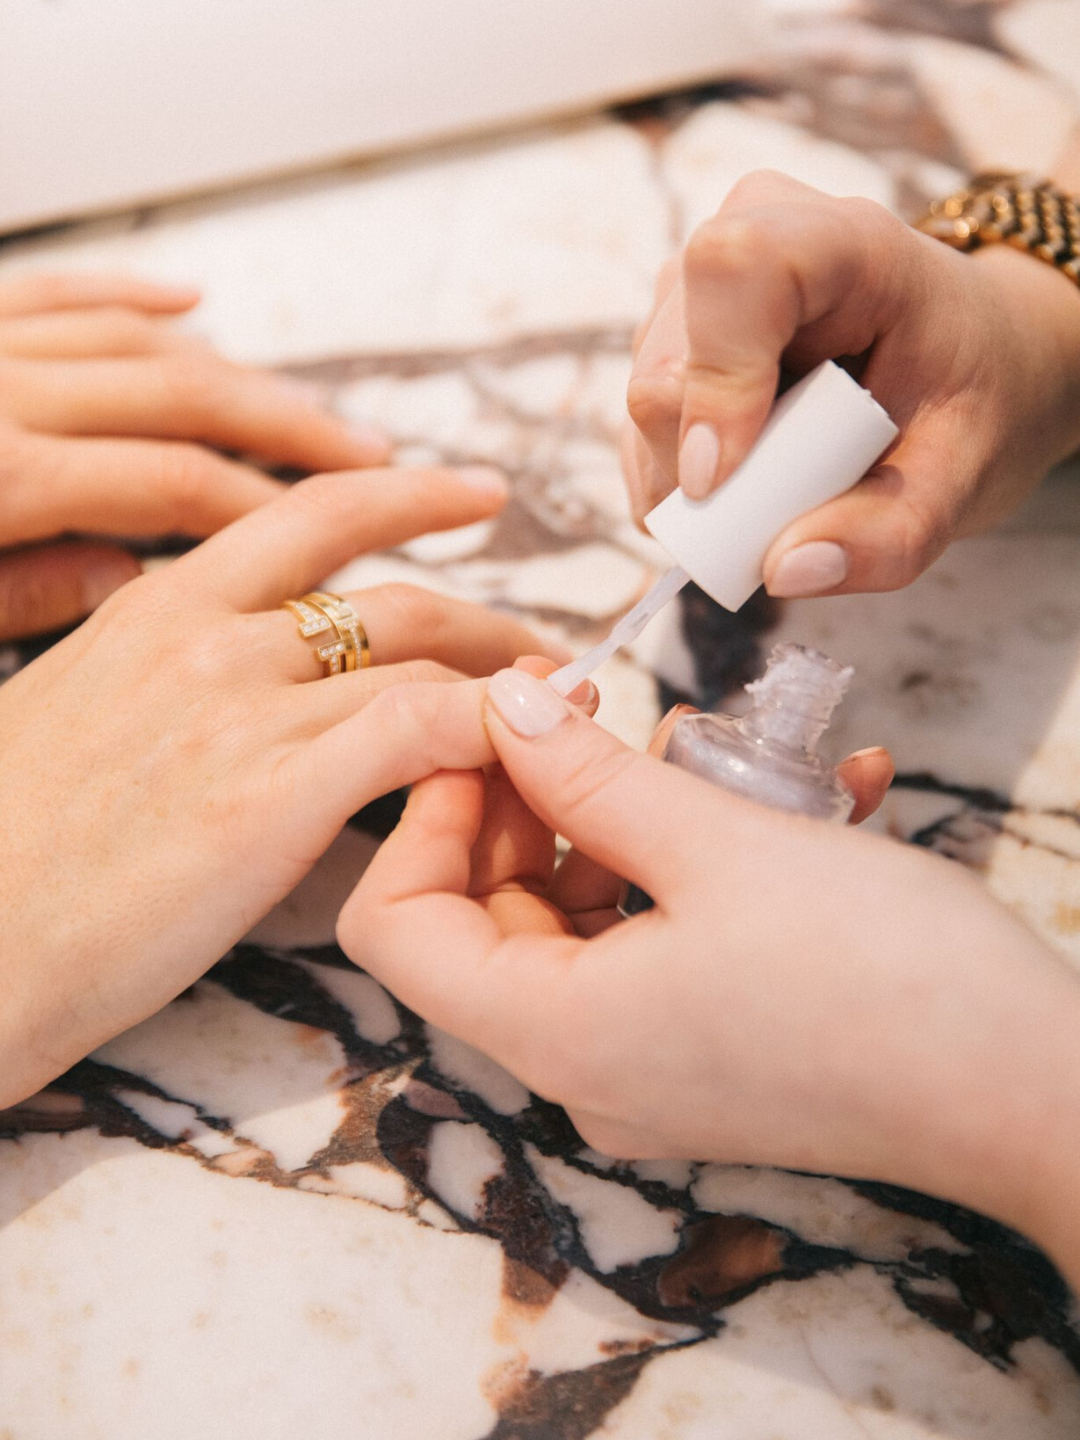 Differences Between Acrylic, Gel, SNS, and Shellac Nails, by Dorothy  Jmeyer